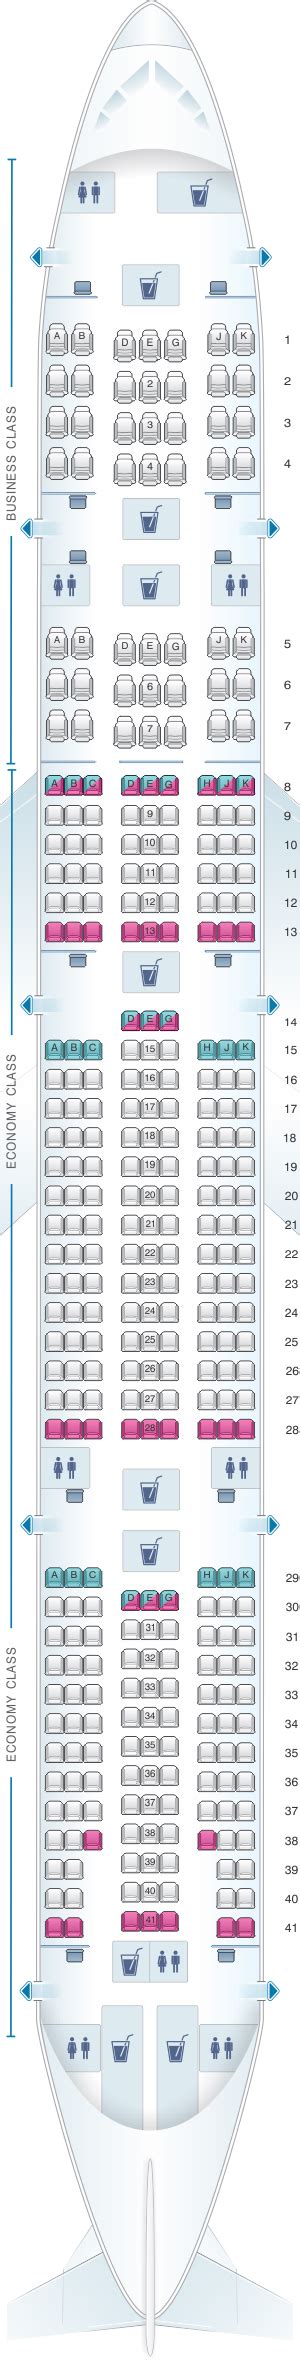 Boeing Er Seat Map Boeing Seat Map Philippine Airlines